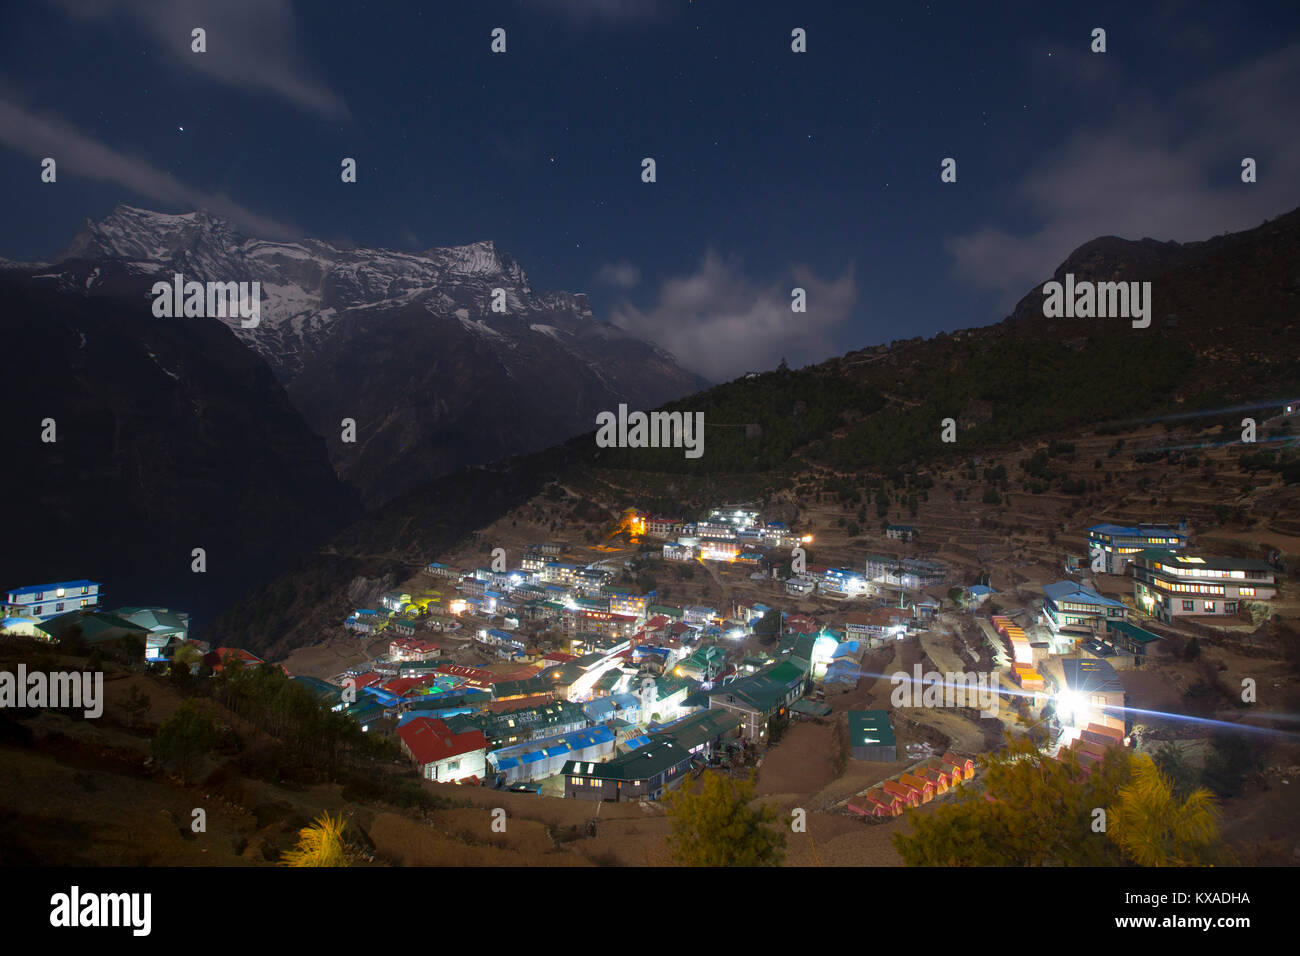 Light falls over Namche Bazar, the capital of the Khumbu Valley. Stock Photo